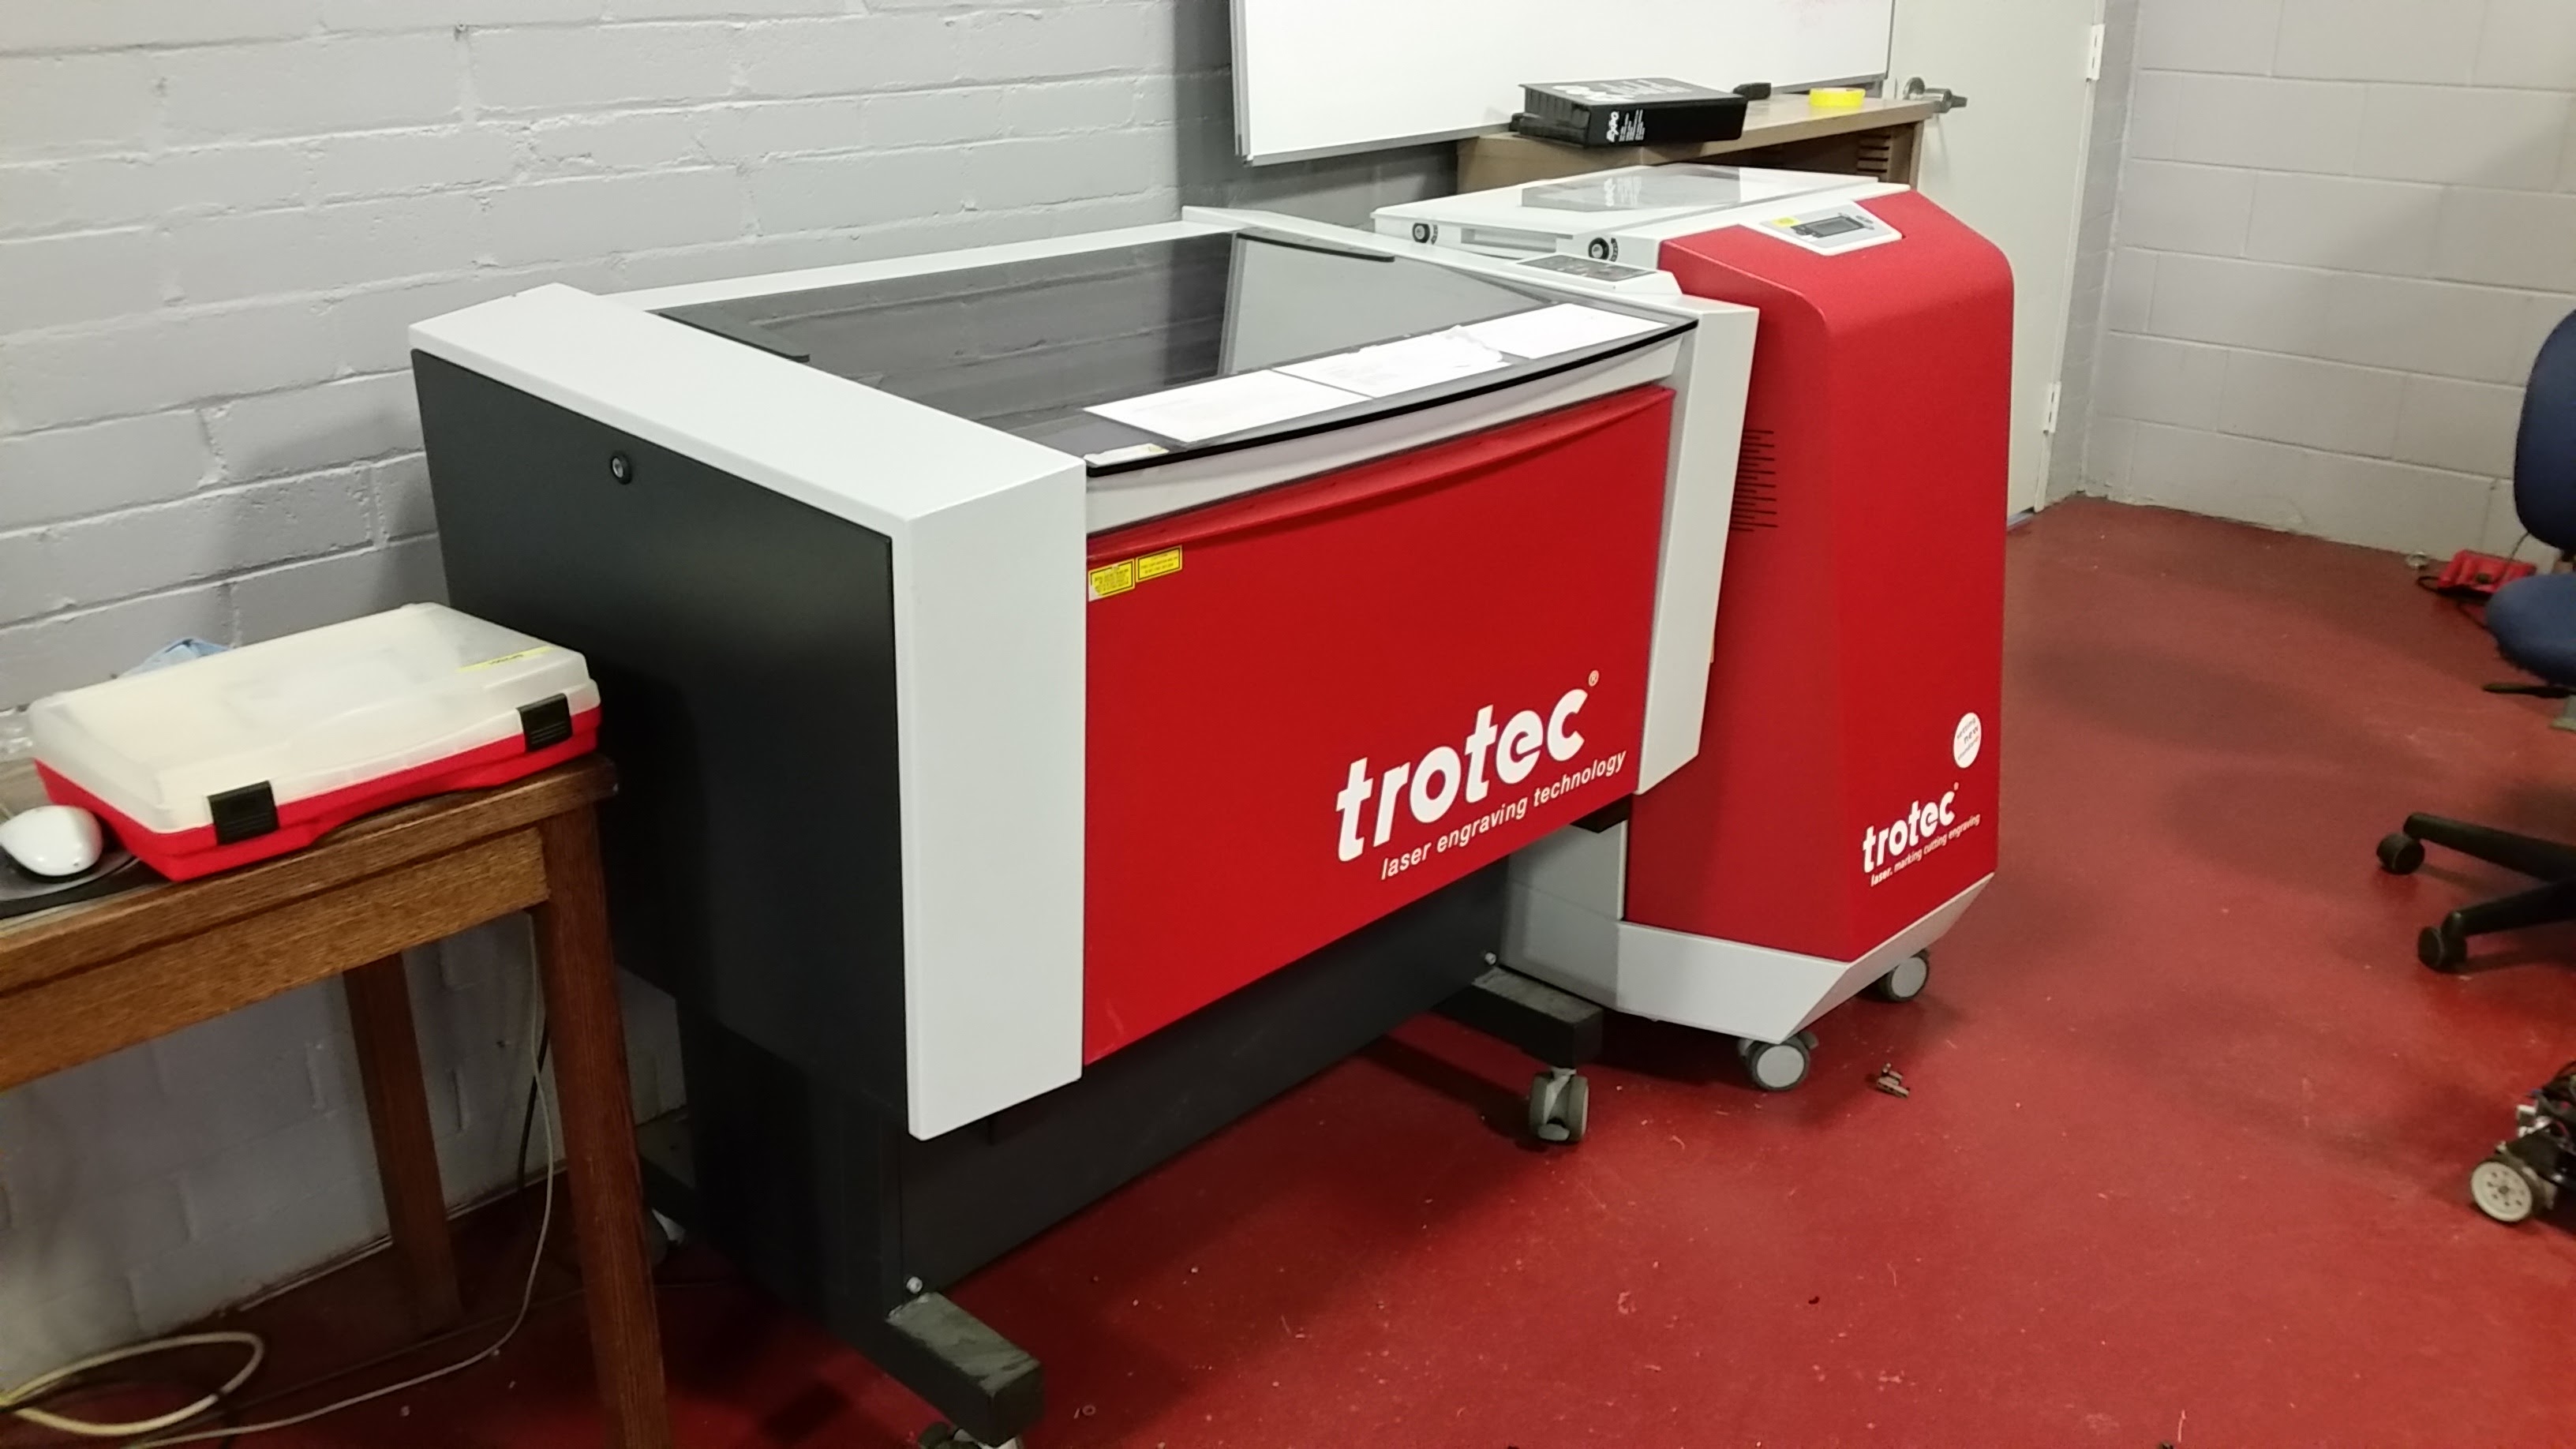 Trotec Laser: Laser engravers and laser cutters